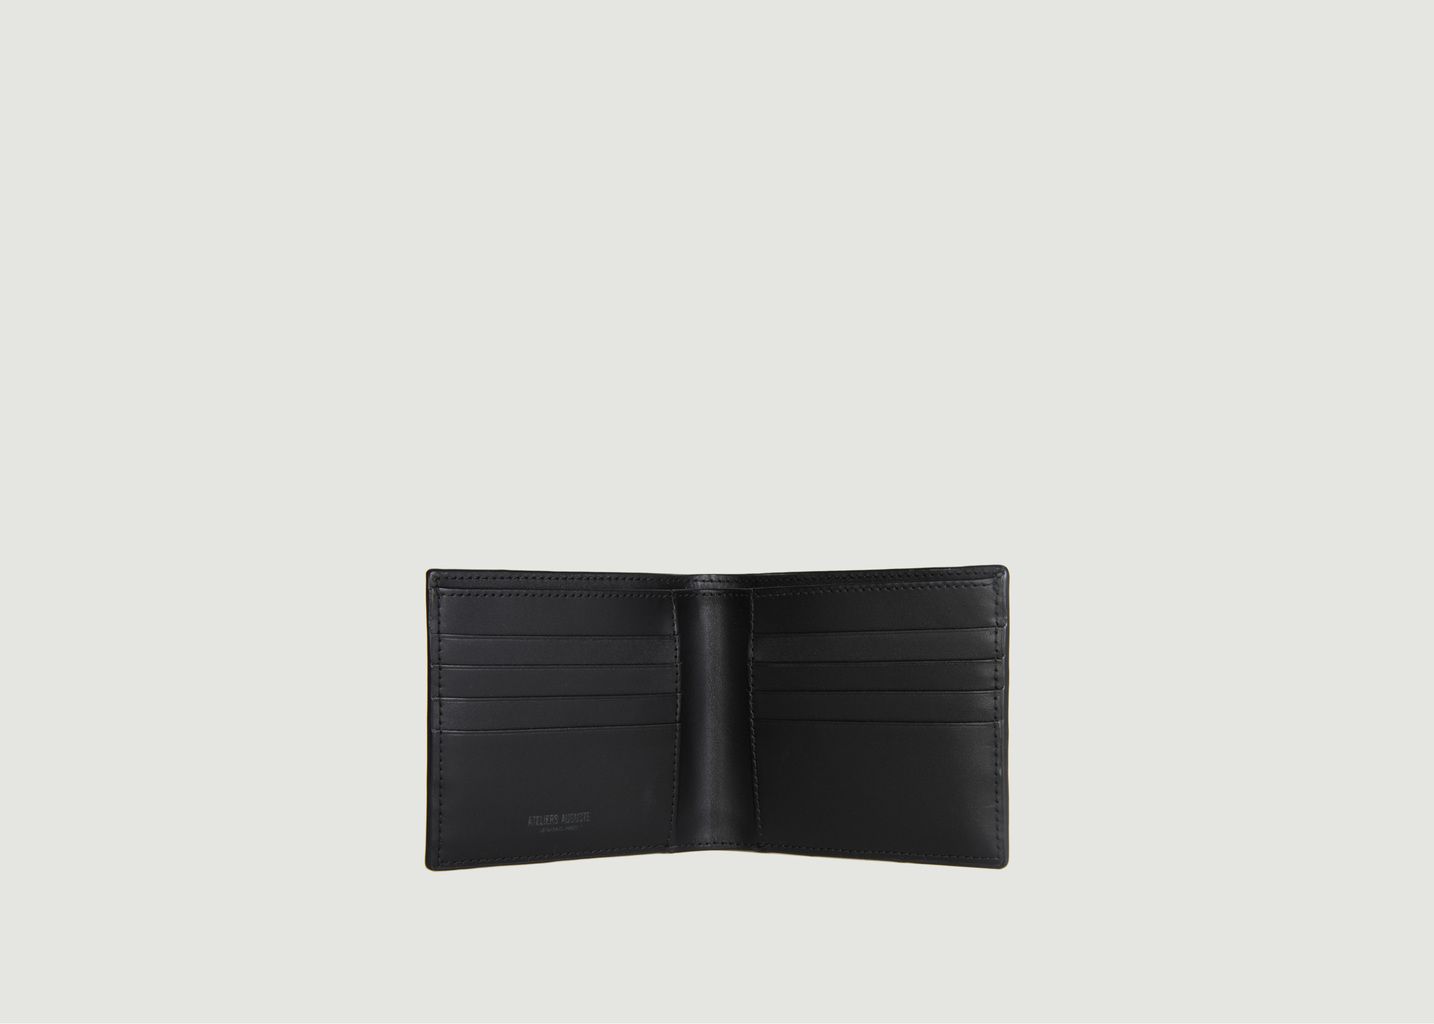 Breguet wallet in grained leather - Ateliers Auguste